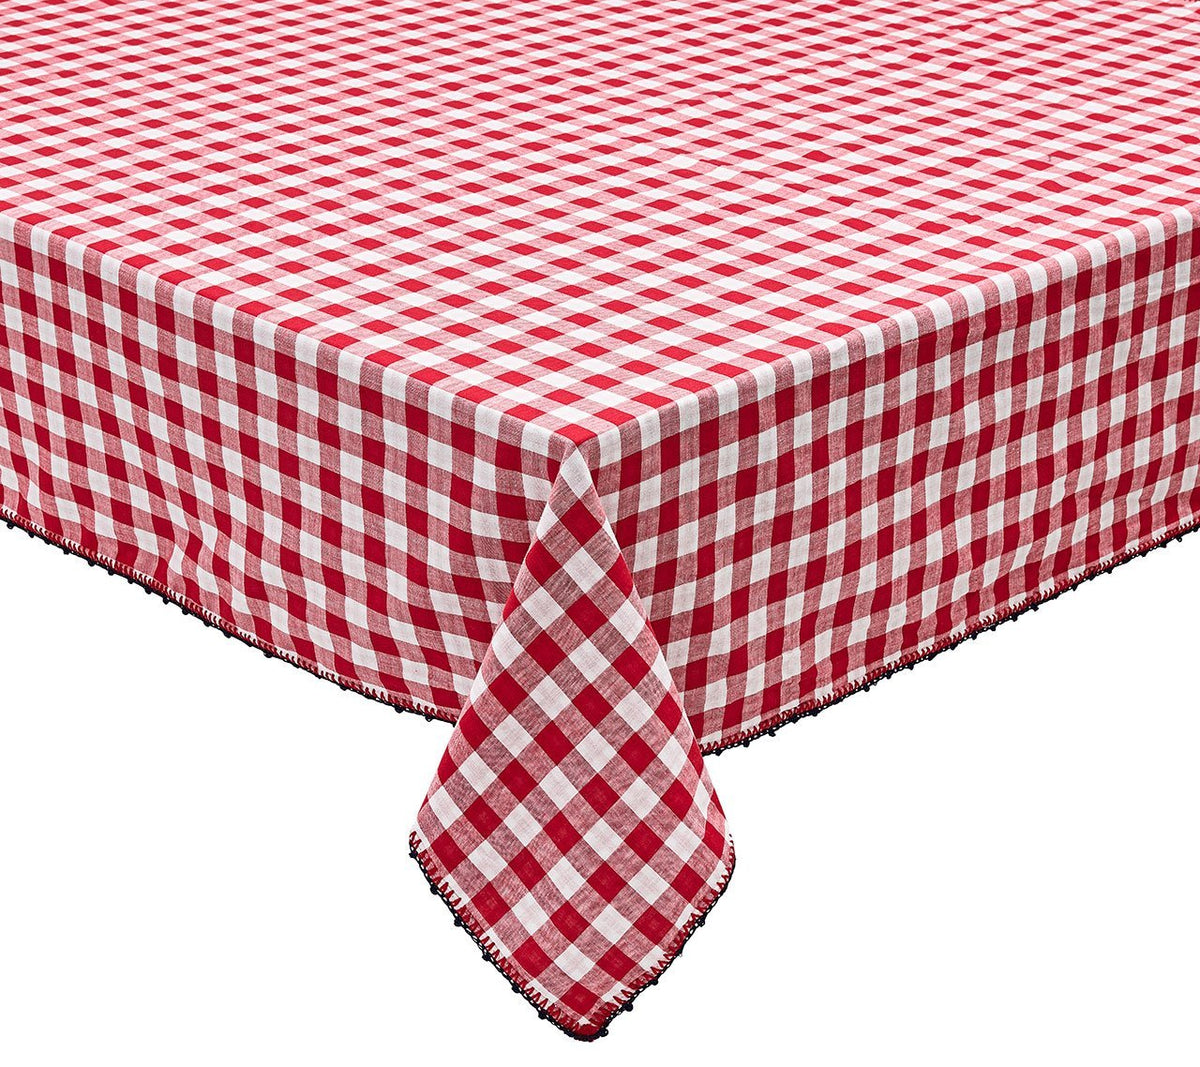 Berry Plaid Tablecloth By April Cornell - McClard's Gifts